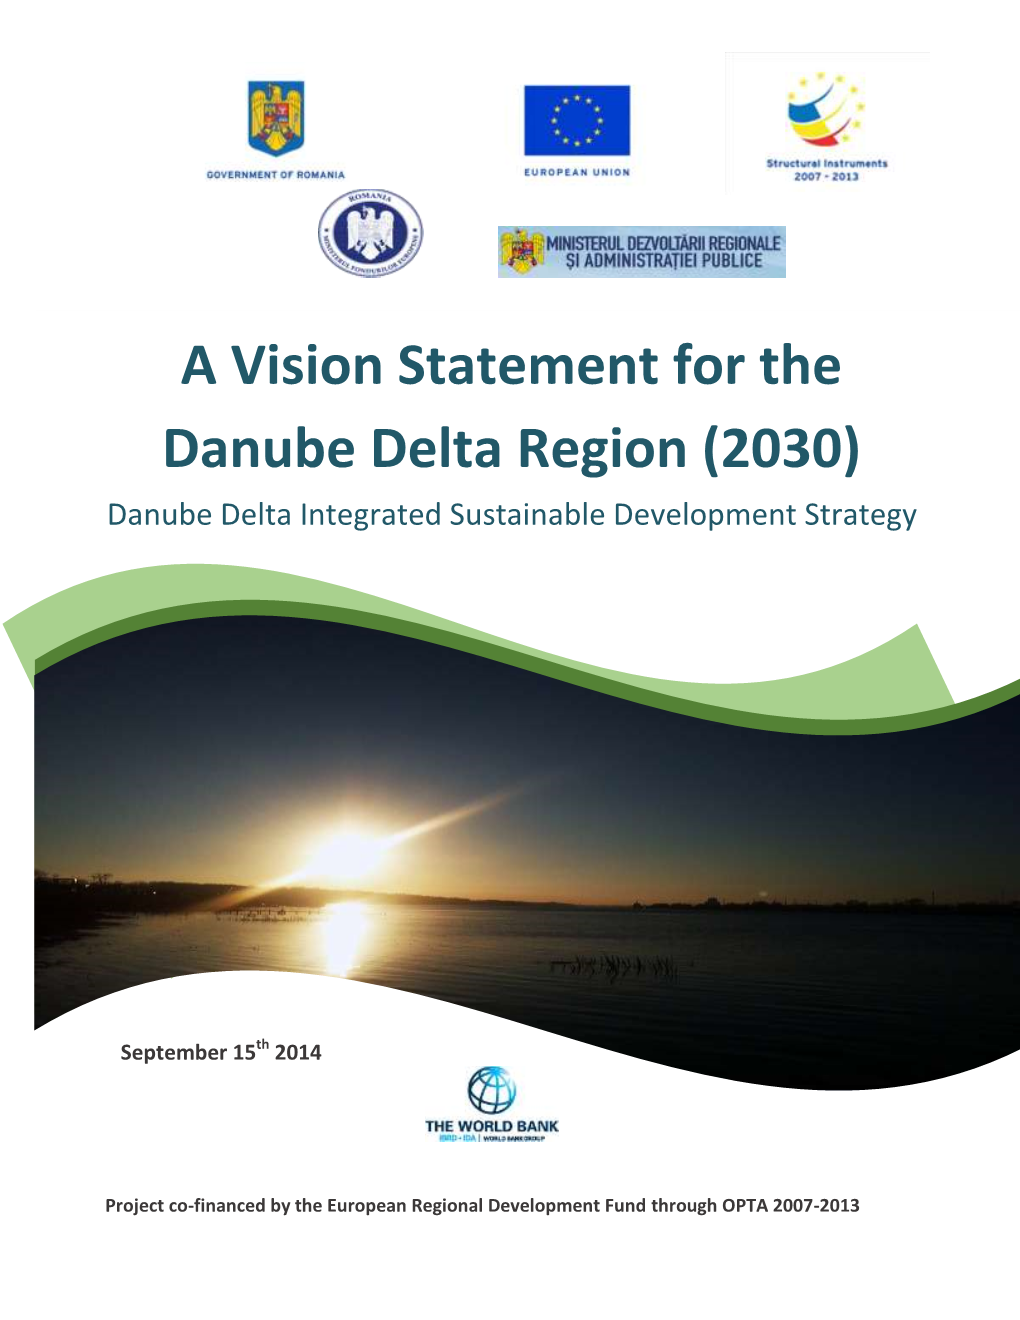 A Vision Statement for the Danube Delta Region (2030) - the Danube Delta and Its Neighboring Area